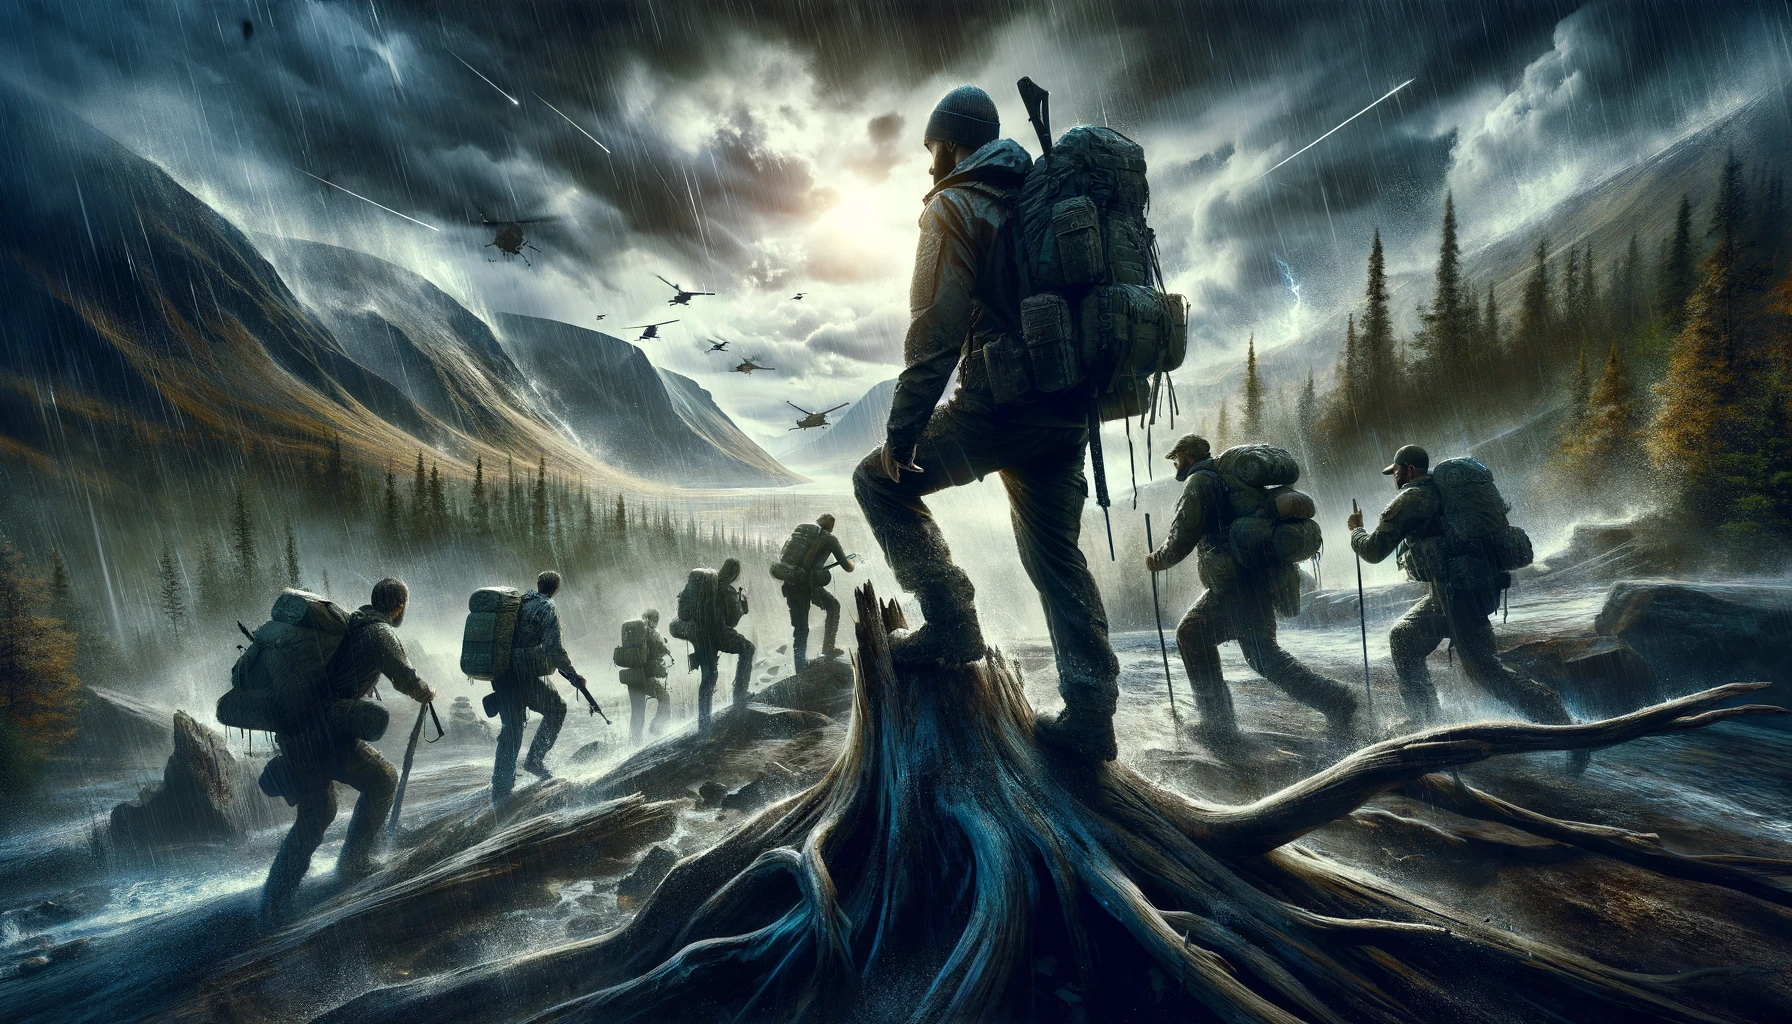 Dynamic illustration of individuals developing a survival mindset in wilderness settings, navigating challenging terrains and practicing mental resilience, capturing the essence of adaptability and perseverance, appealing to preppers.